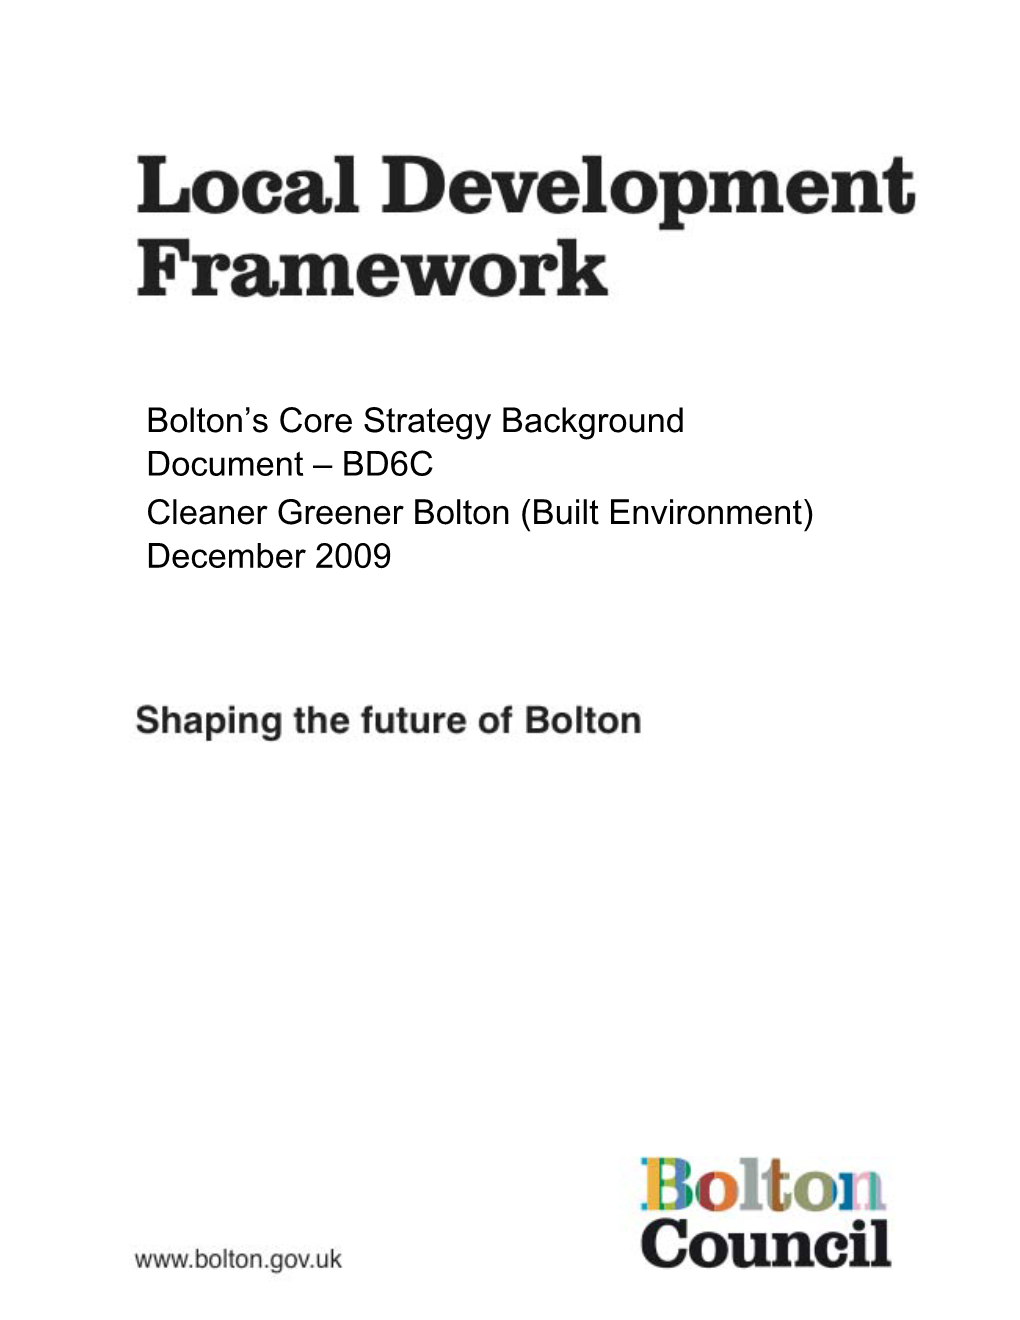 Bolton's Core Strategy Background Document – BD6C